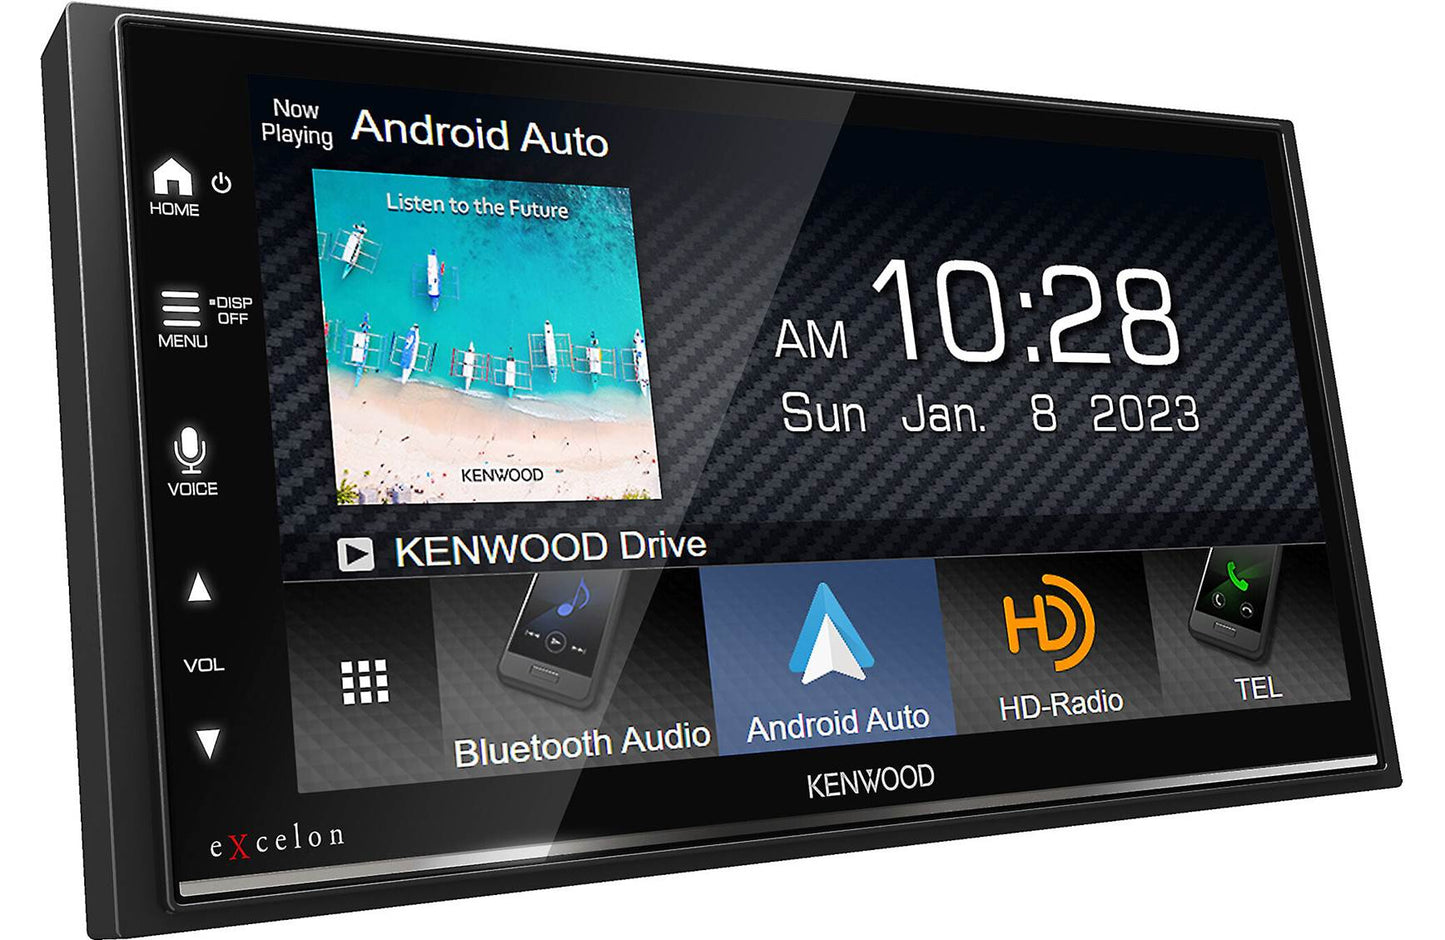 Kenwood DMX809S 6.95" Touch Screen Car Stereo-Wireless Apple CarPlay, Android Auto  + SXV300V1 SiriusXM Satellite Tuner